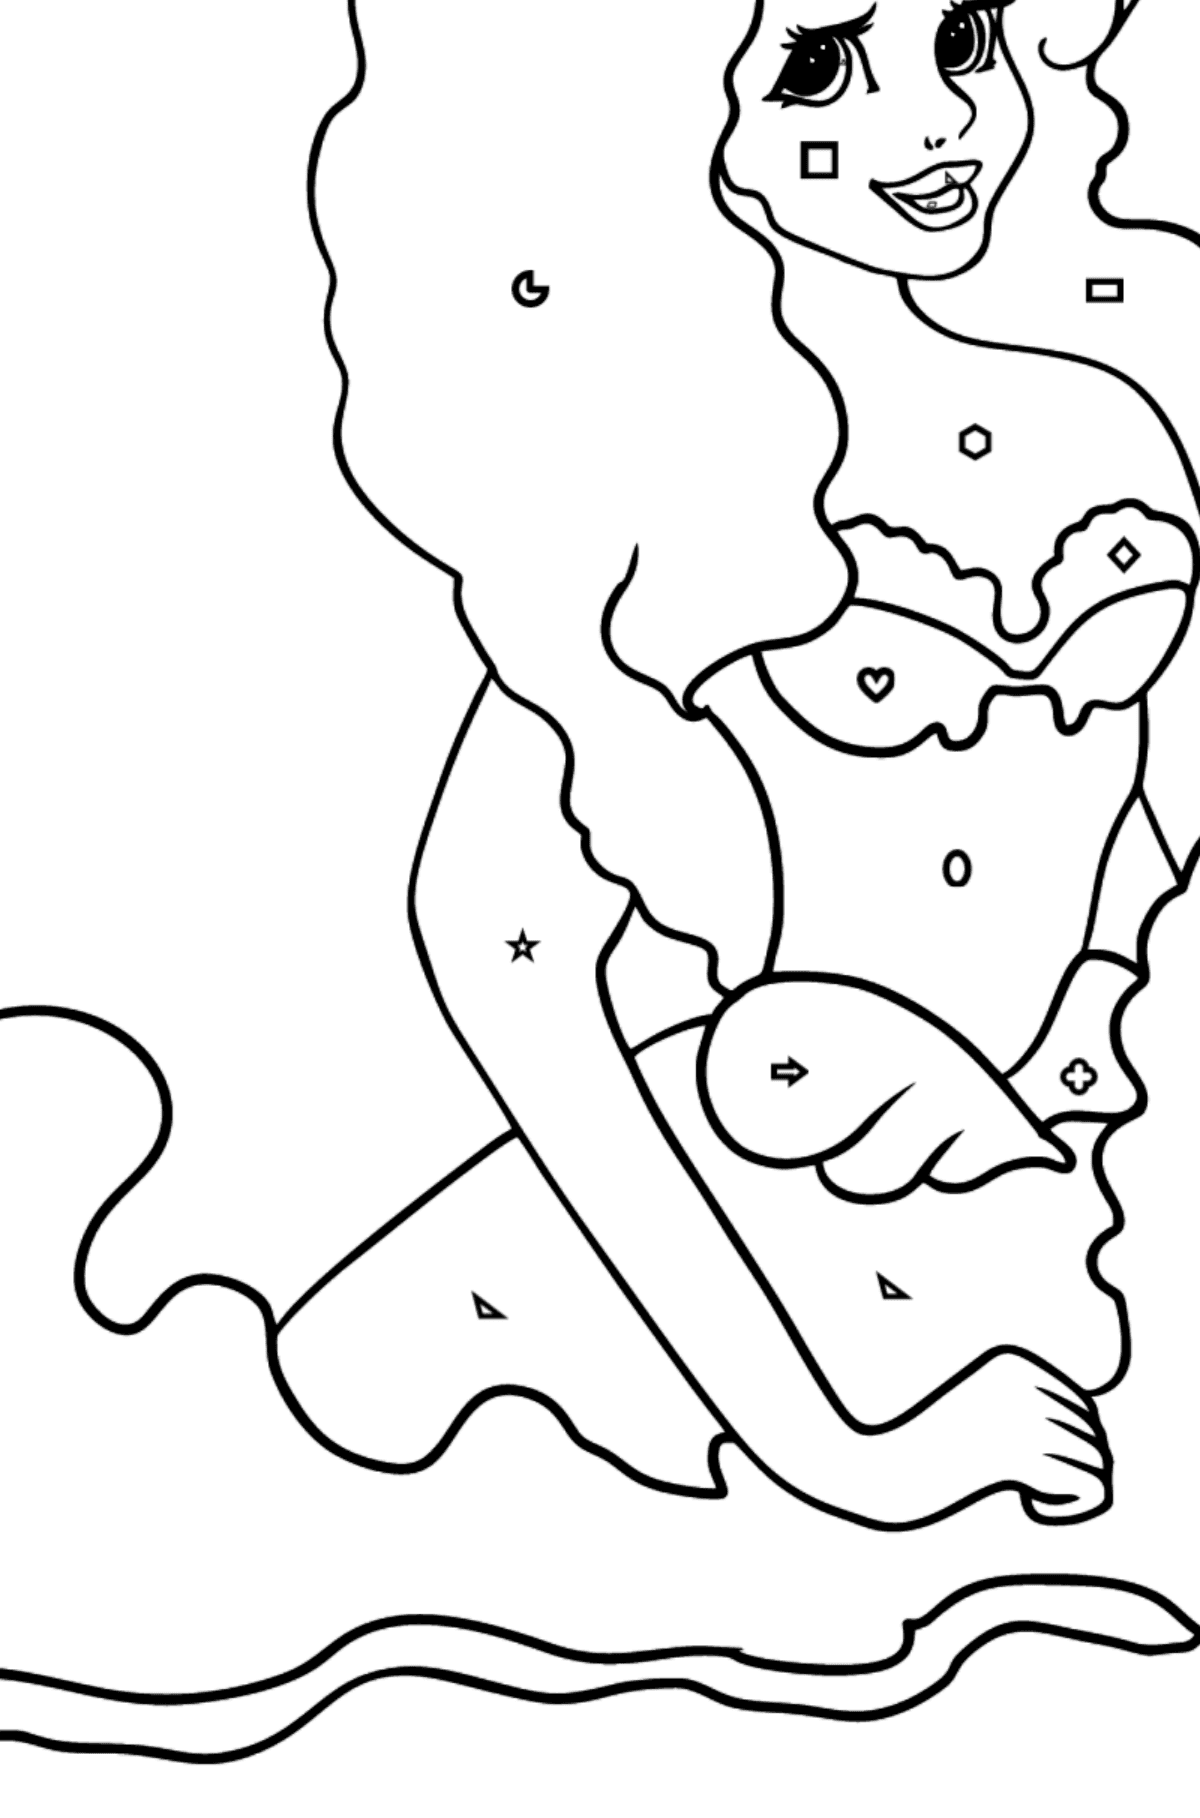 Coloring Page Mermaid on the waves - Coloring by Geometric Shapes for Kids